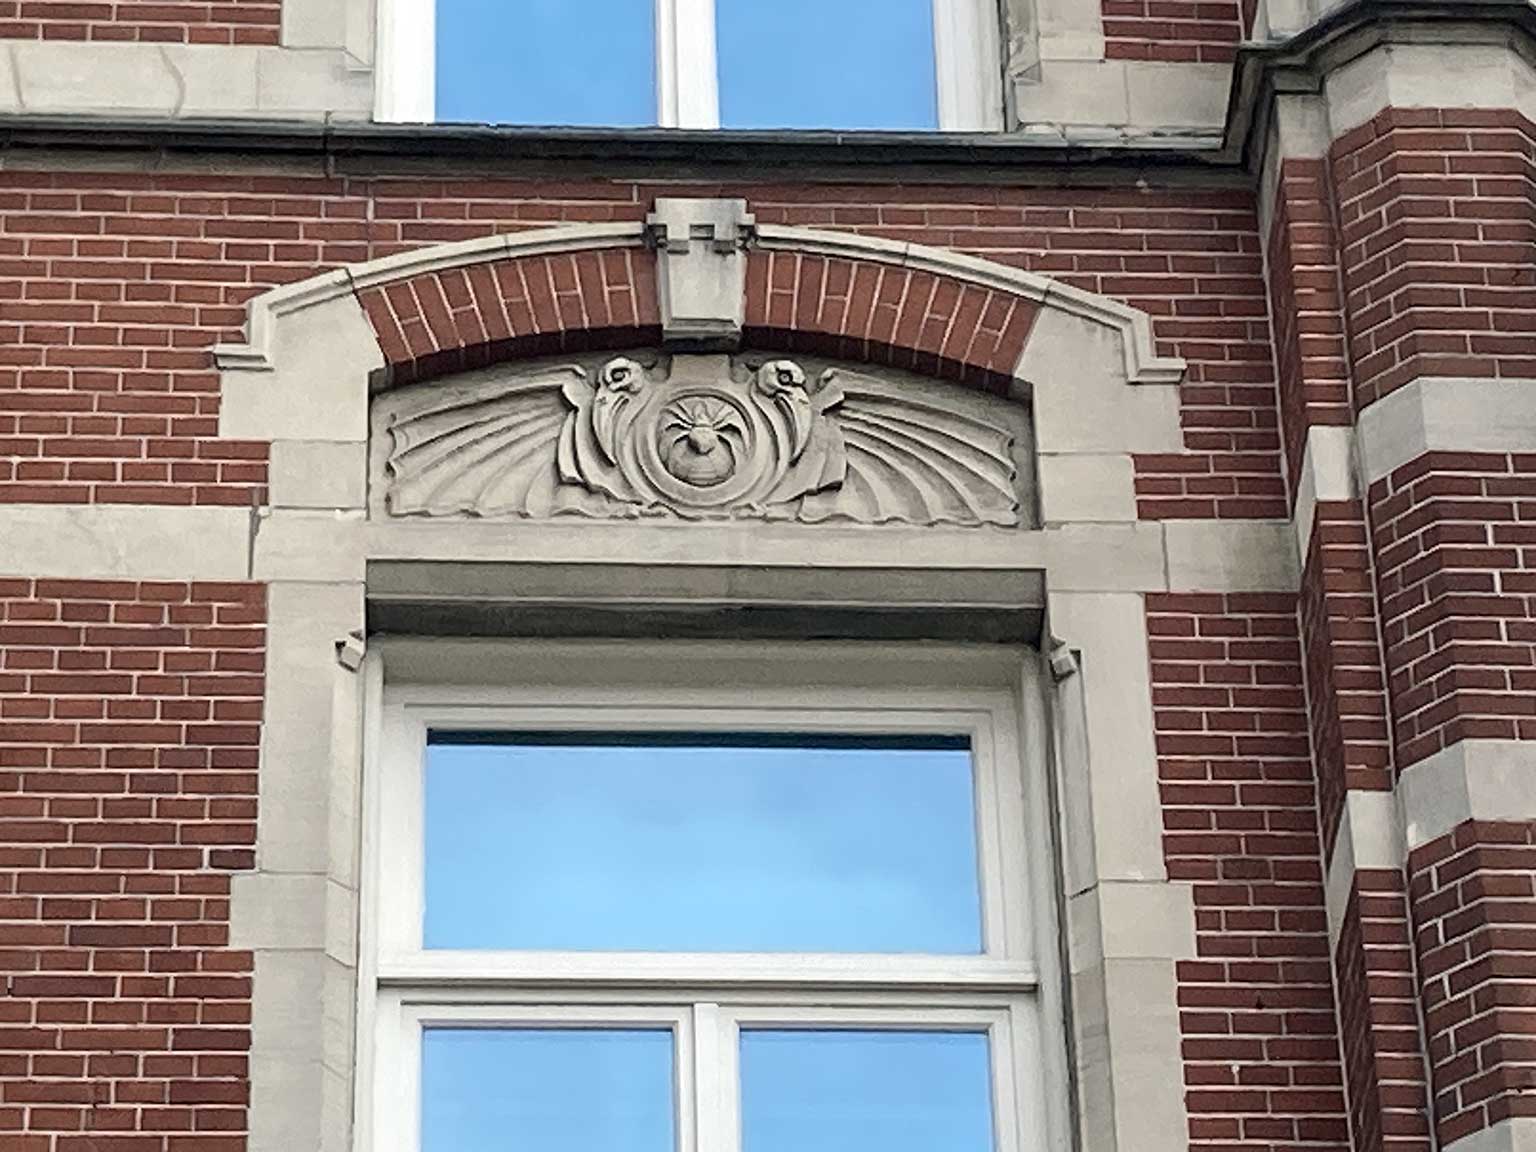 Spider and stylized birds on the façade of De L'Europe, Nieuwe Doelenstraat 2-14, Amsterdam